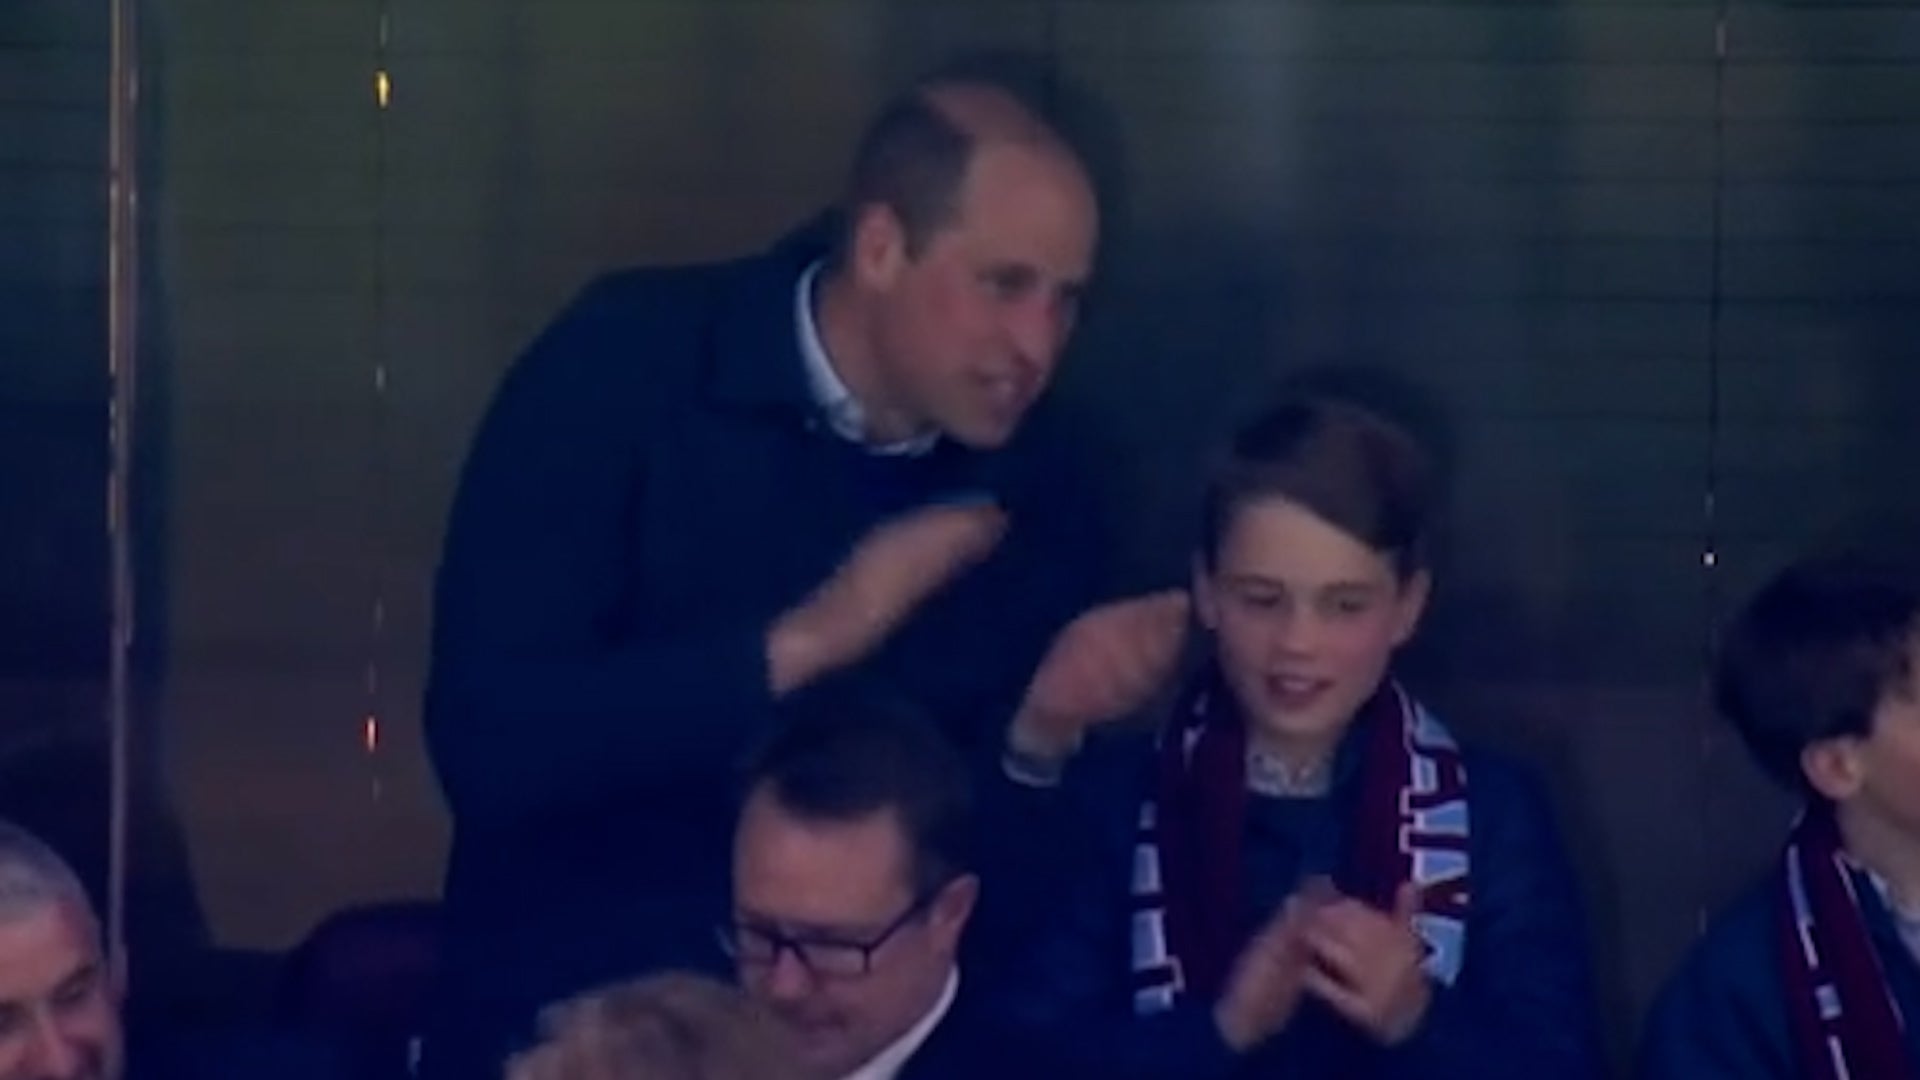 Prince William was spotted with Prince George at Aston Villa match in April